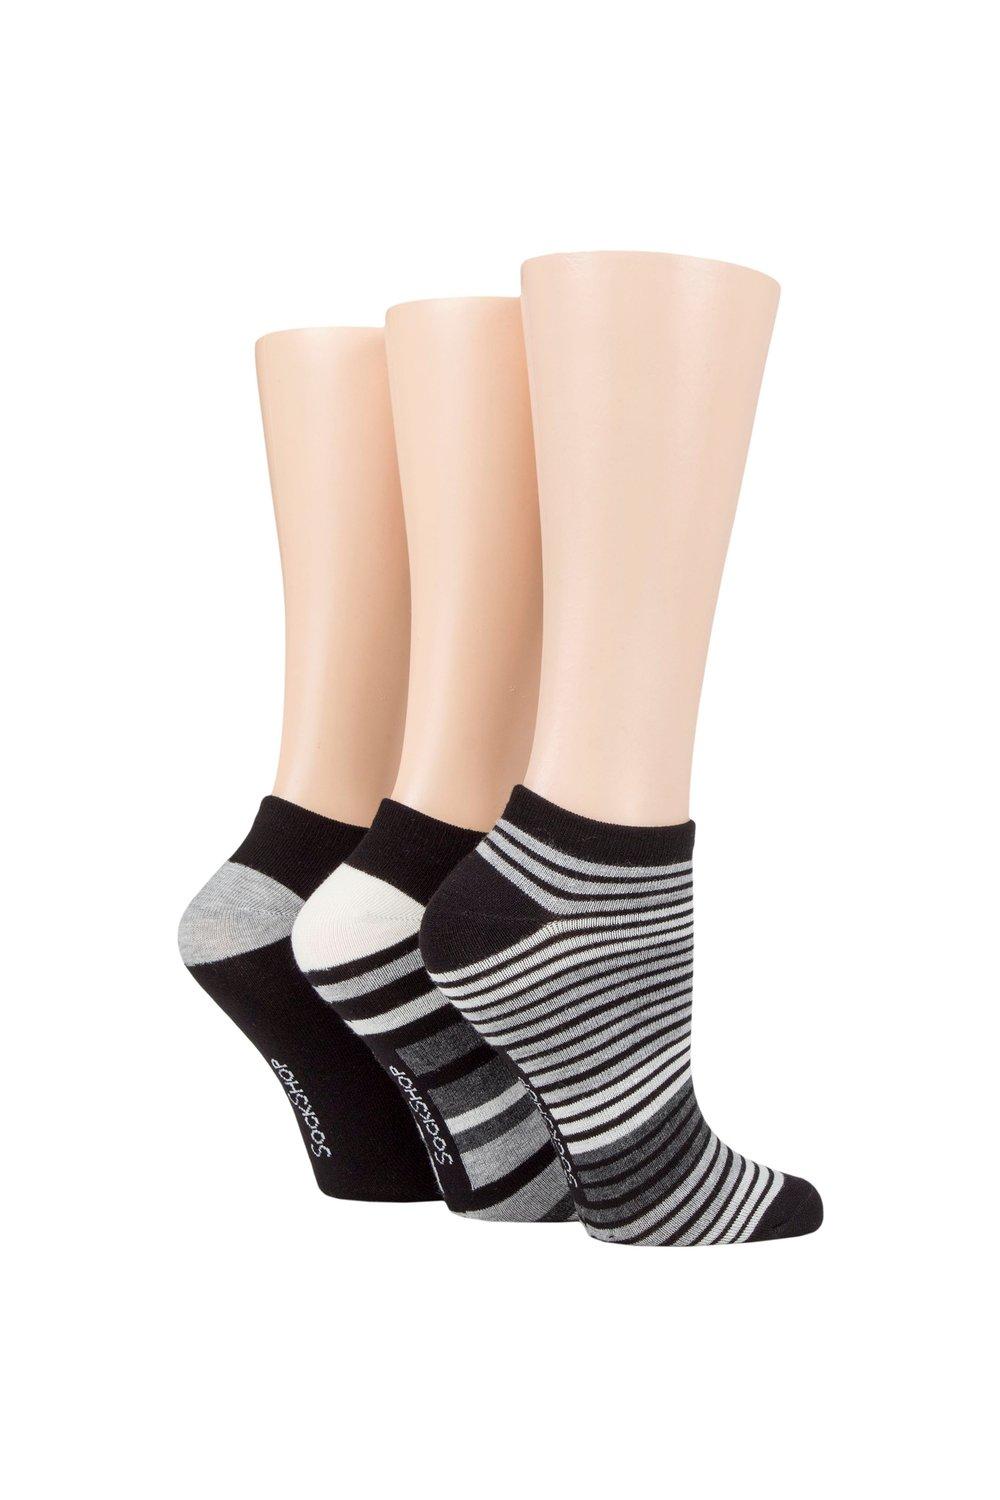 3 Pair Striped, Plain, Ribbed and Mesh Bamboo Trainer Socks